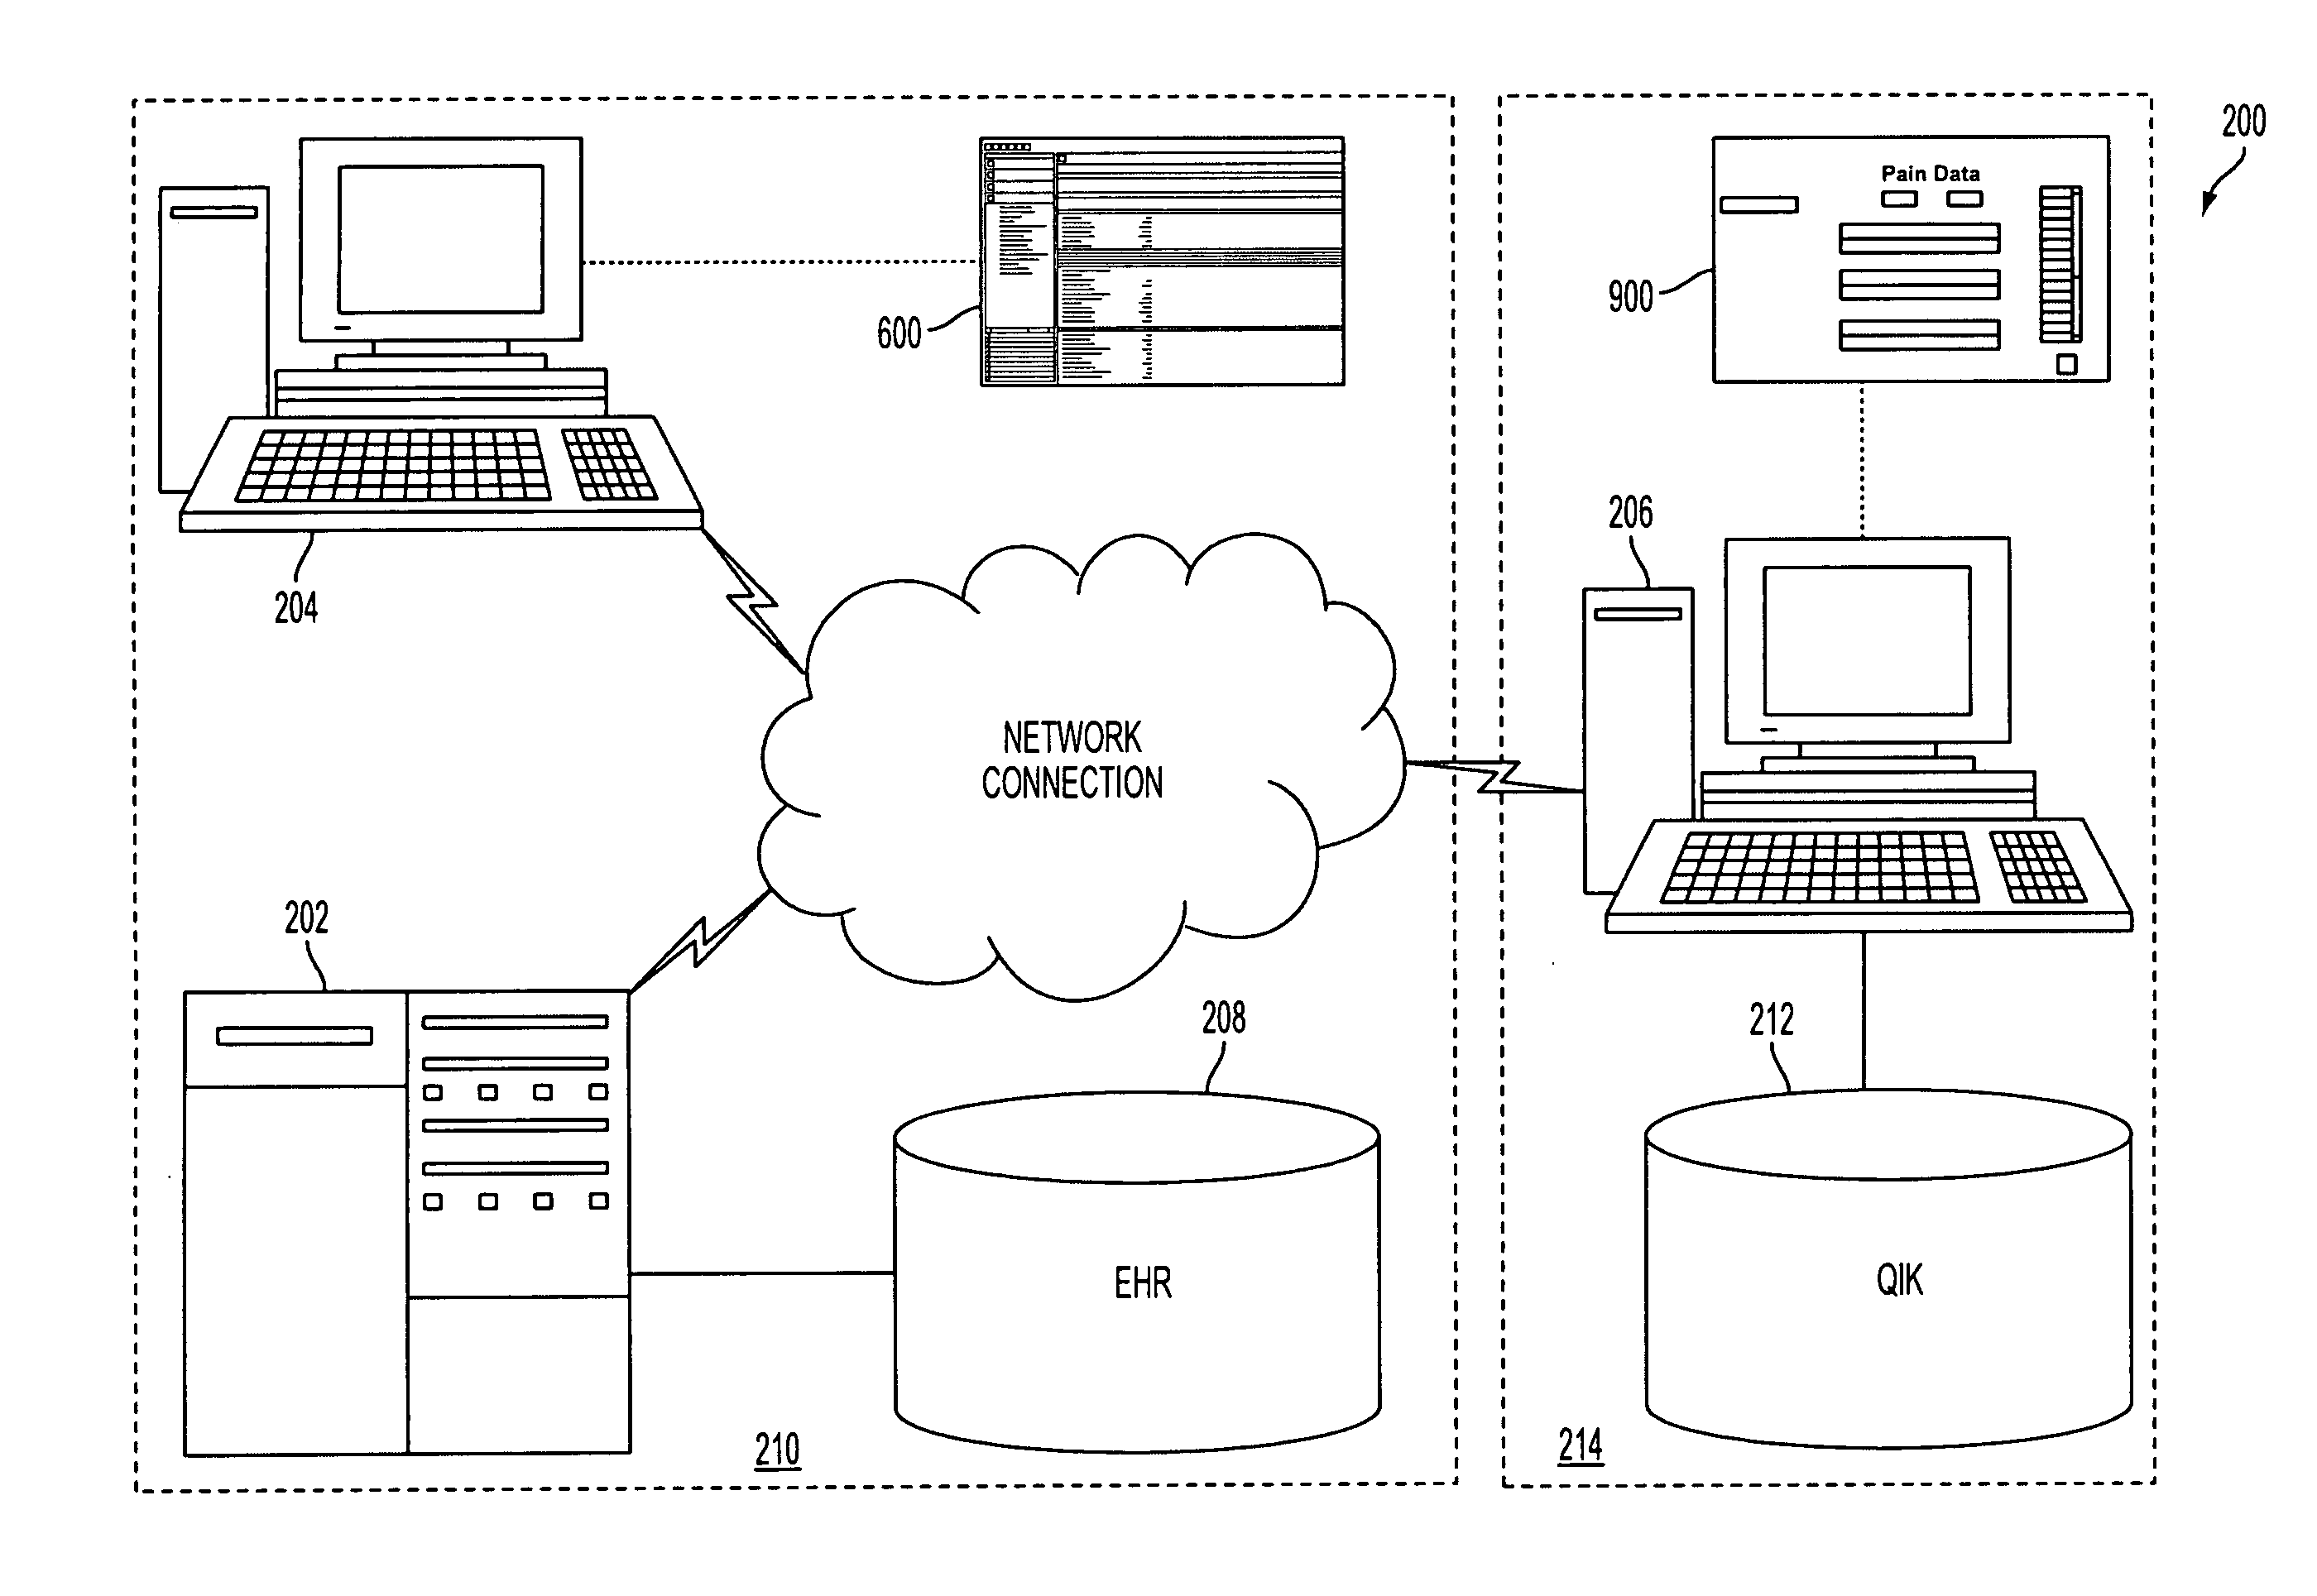 Apparatus and method for generating quality informatics knowledge